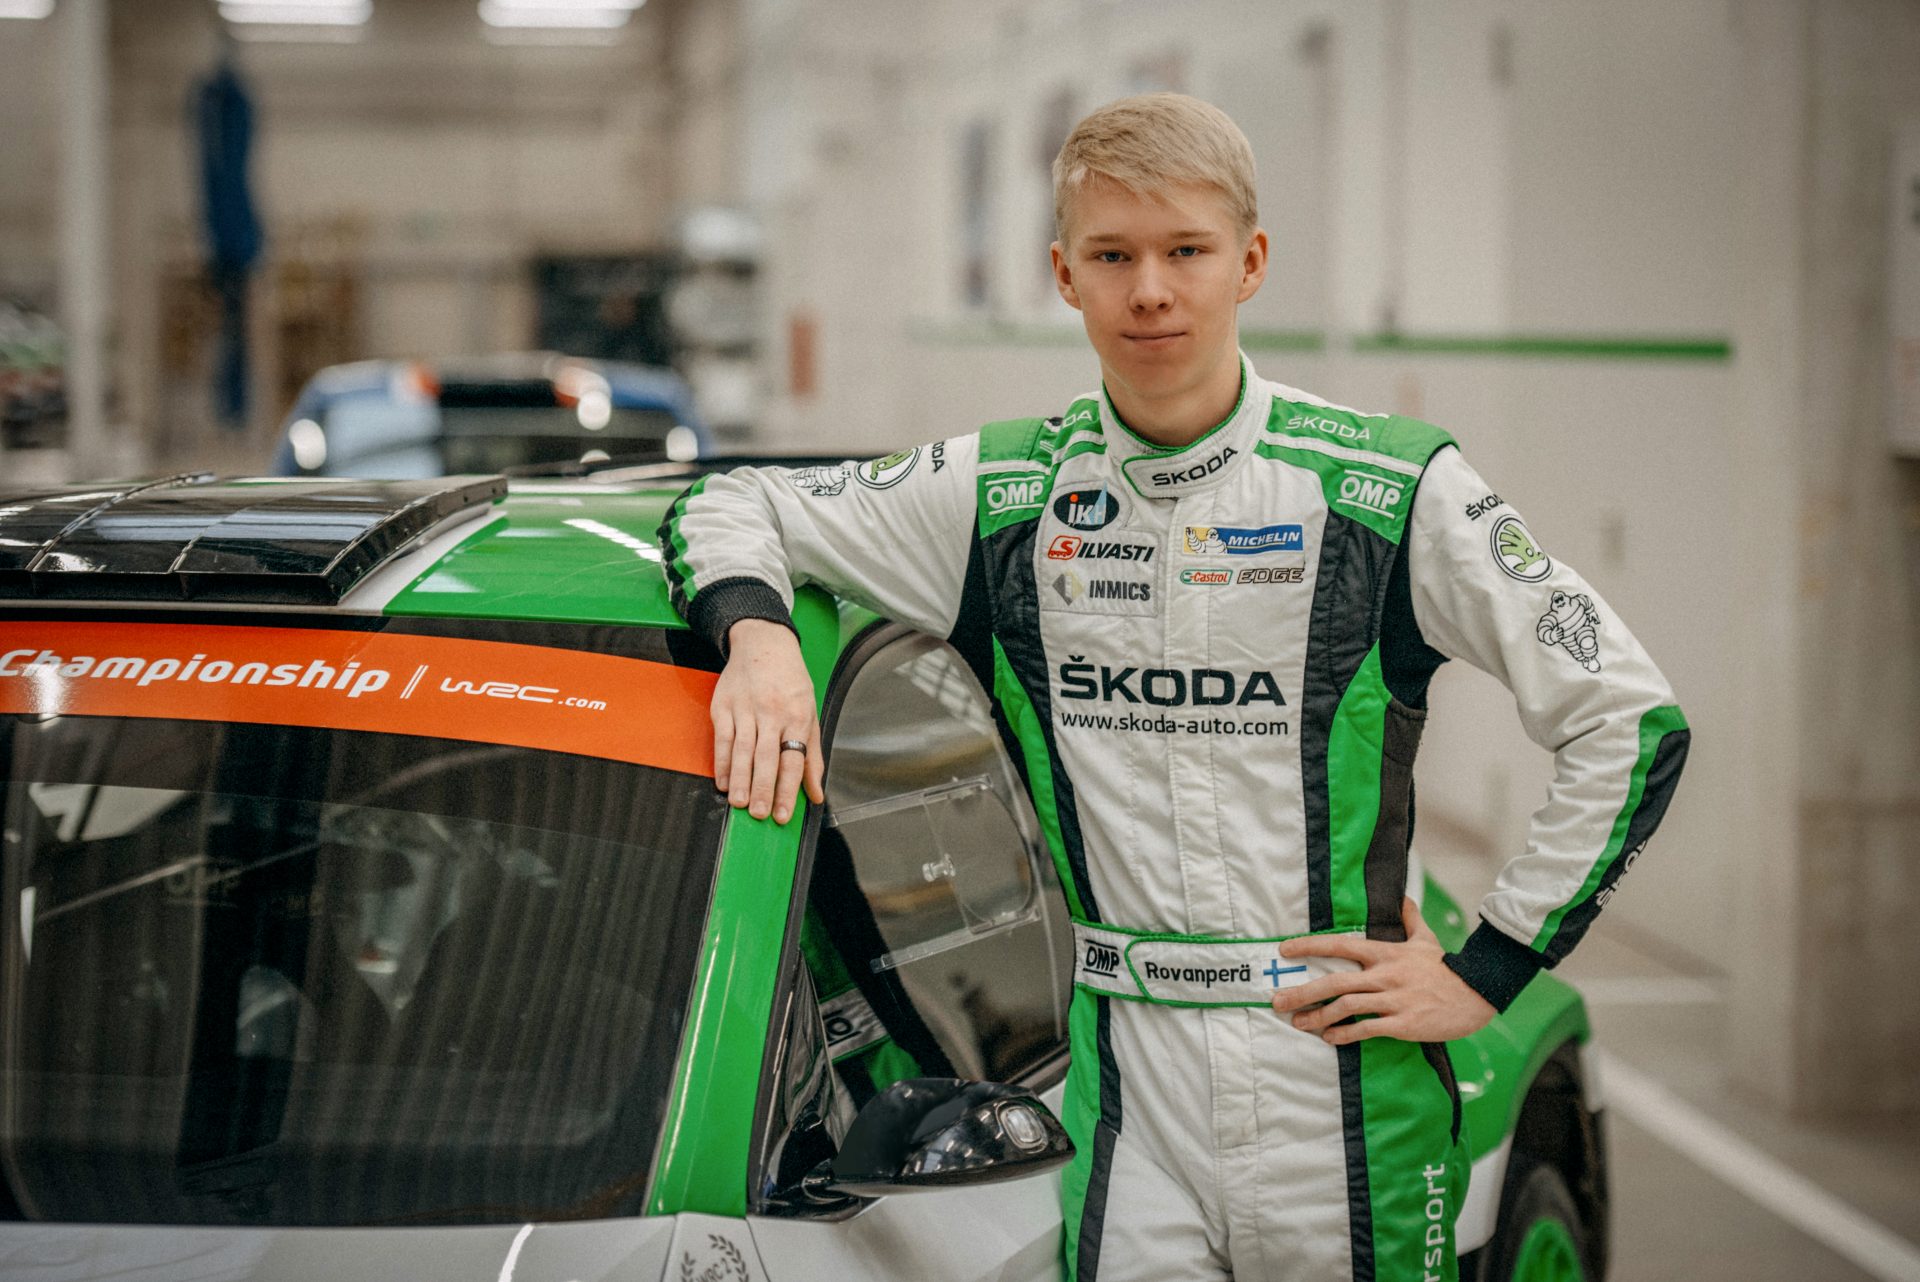 Kalle Rovanperä is 18: How Do You Become Successful in WRC 2 Before You're  Adult? - Škoda Motorsport